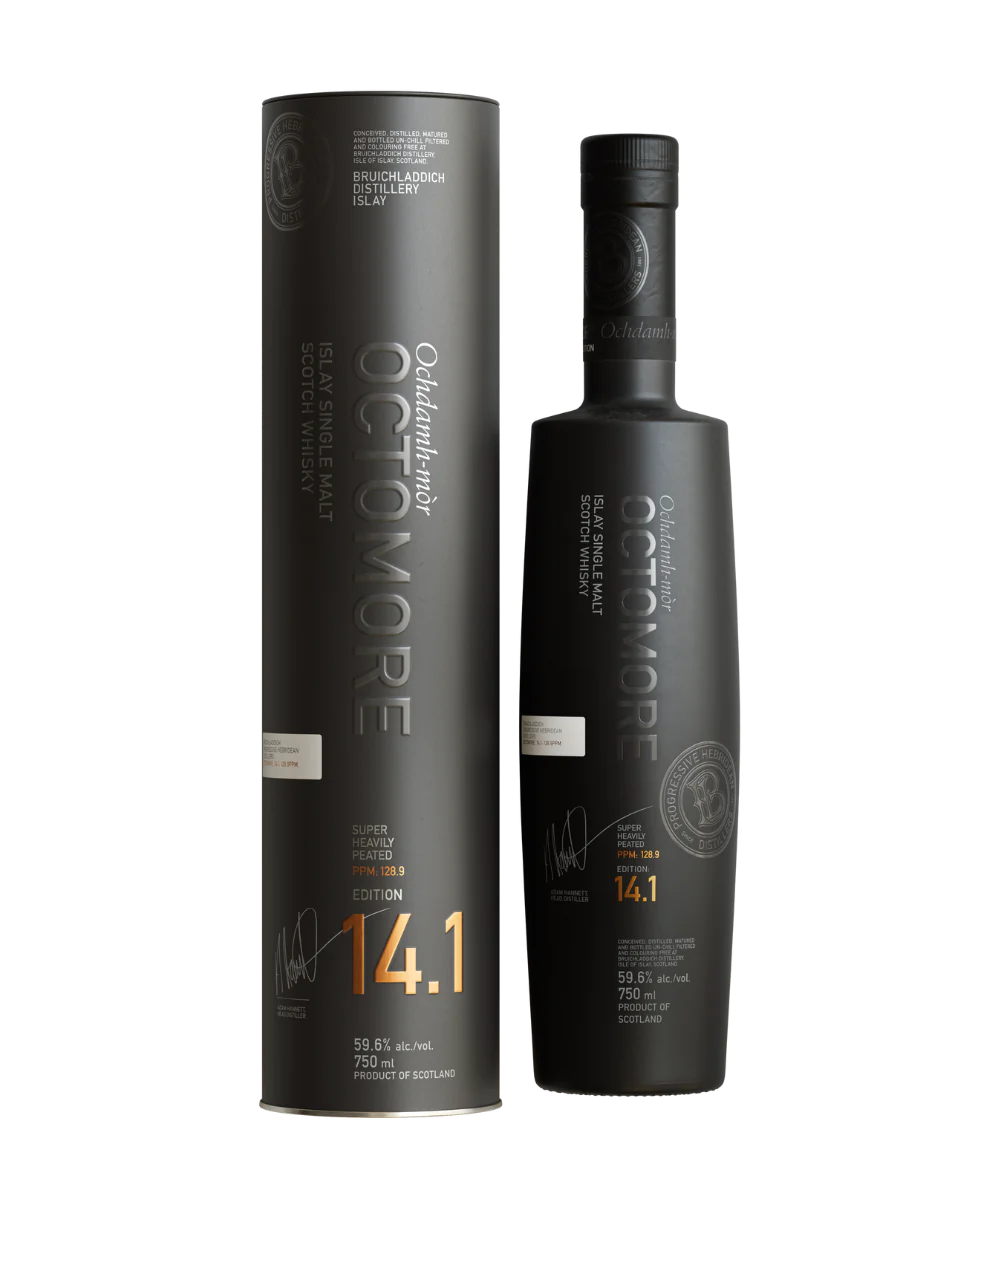 Octomore 14.1 750mL a tall dark gray tin cylinder next to a tall rounded shouldered slender black glass bottle 